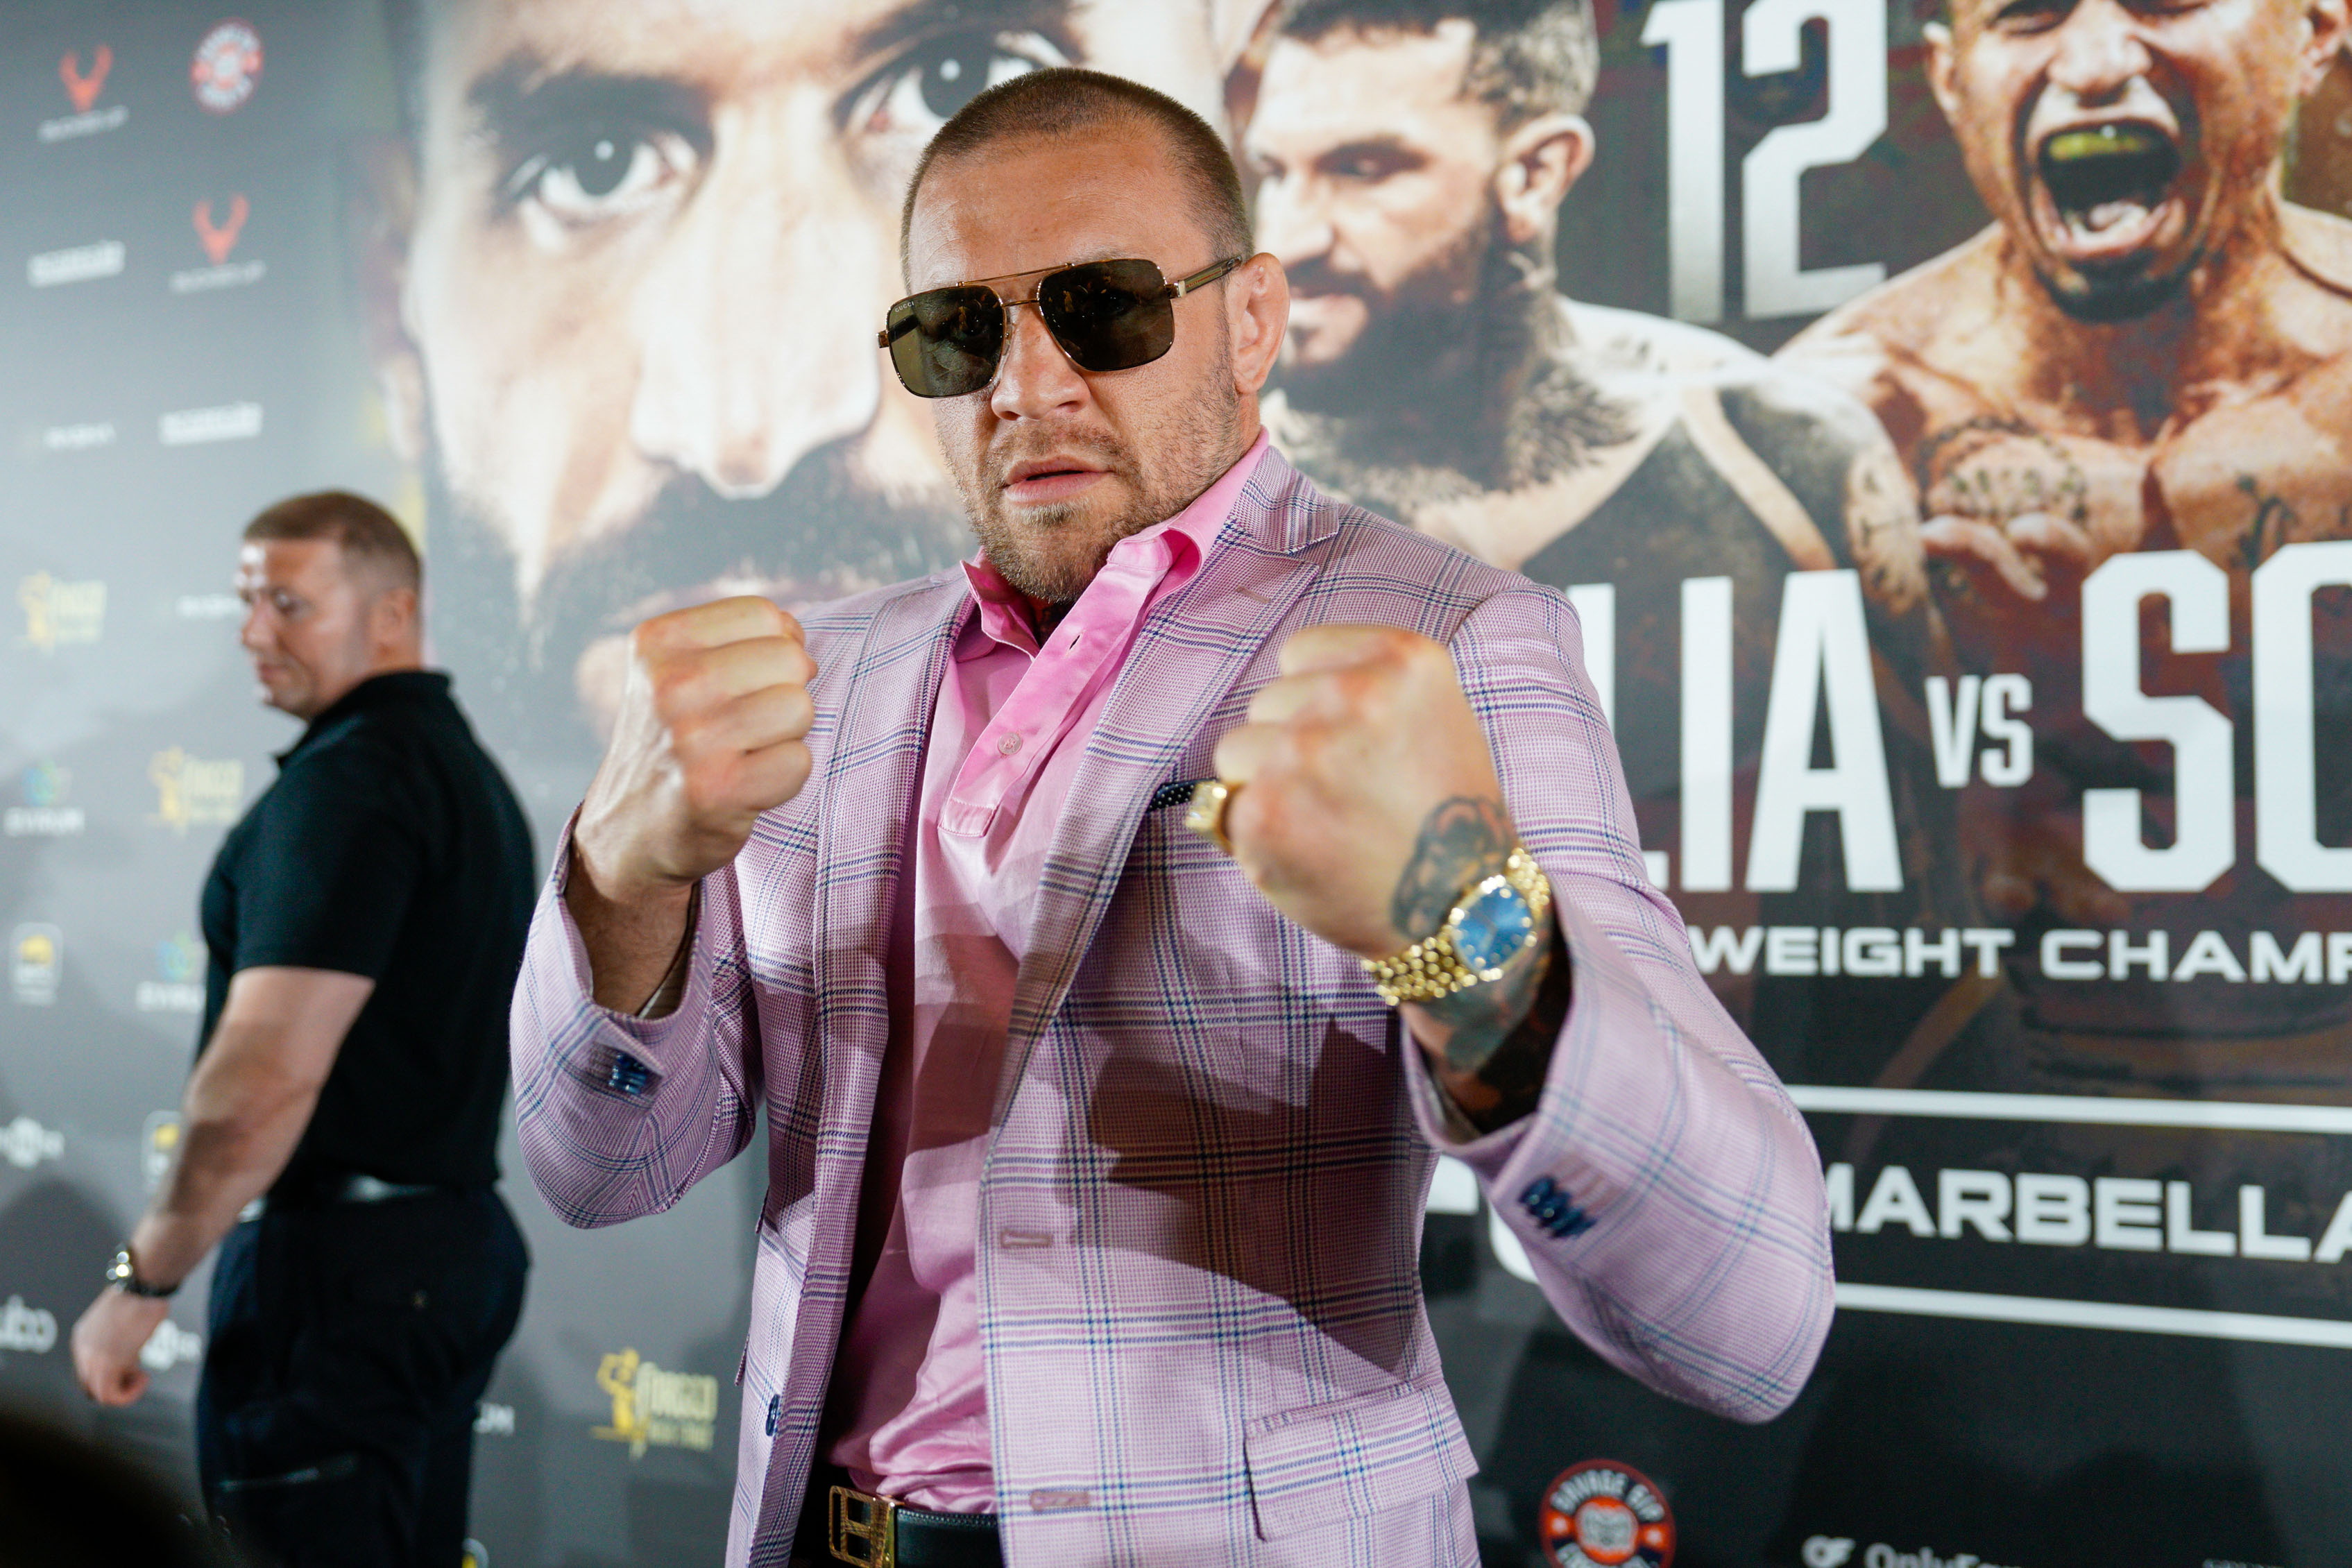 Conor McGregor fired Perry from BKFC - which he co-owns